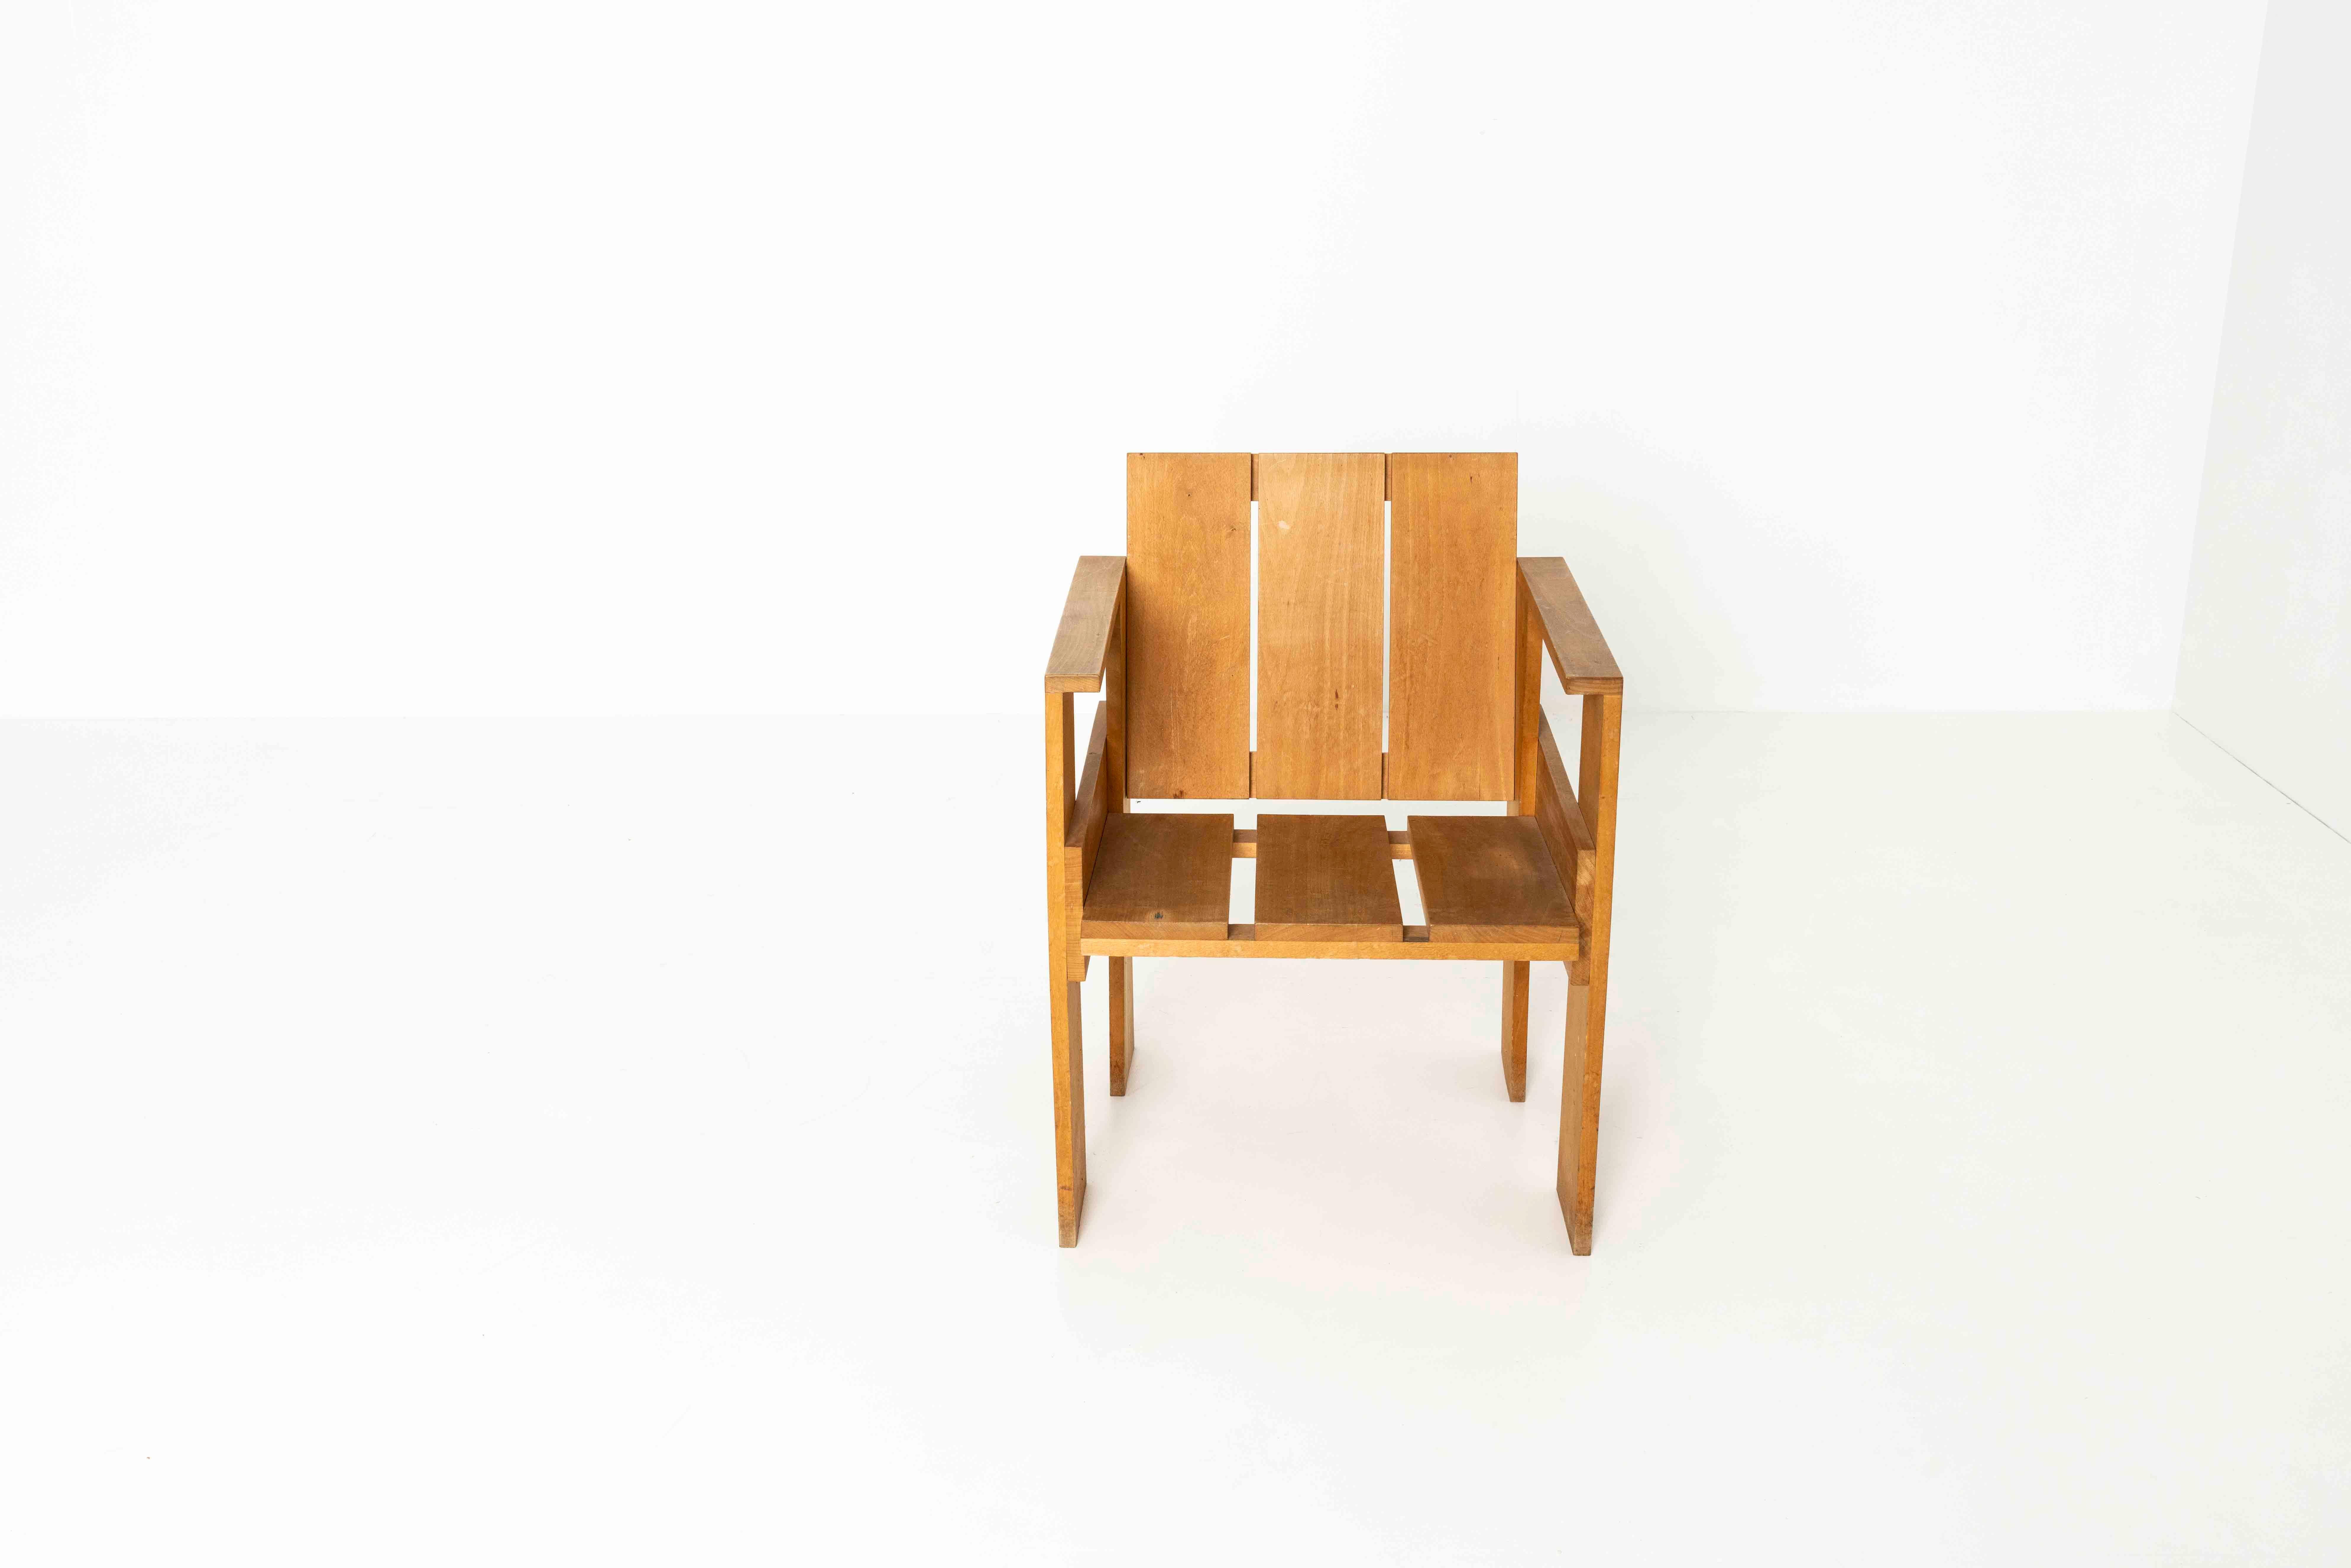 Nice Gerrit Rietveld 'Crate' chair. This chair is designed in 1934, however, we think this is a Cassina edition from the 1970s. This chair is made out of ash wood and has a colorless lacquer. 

'Gerrit Rietveld designed the 'crate' series of